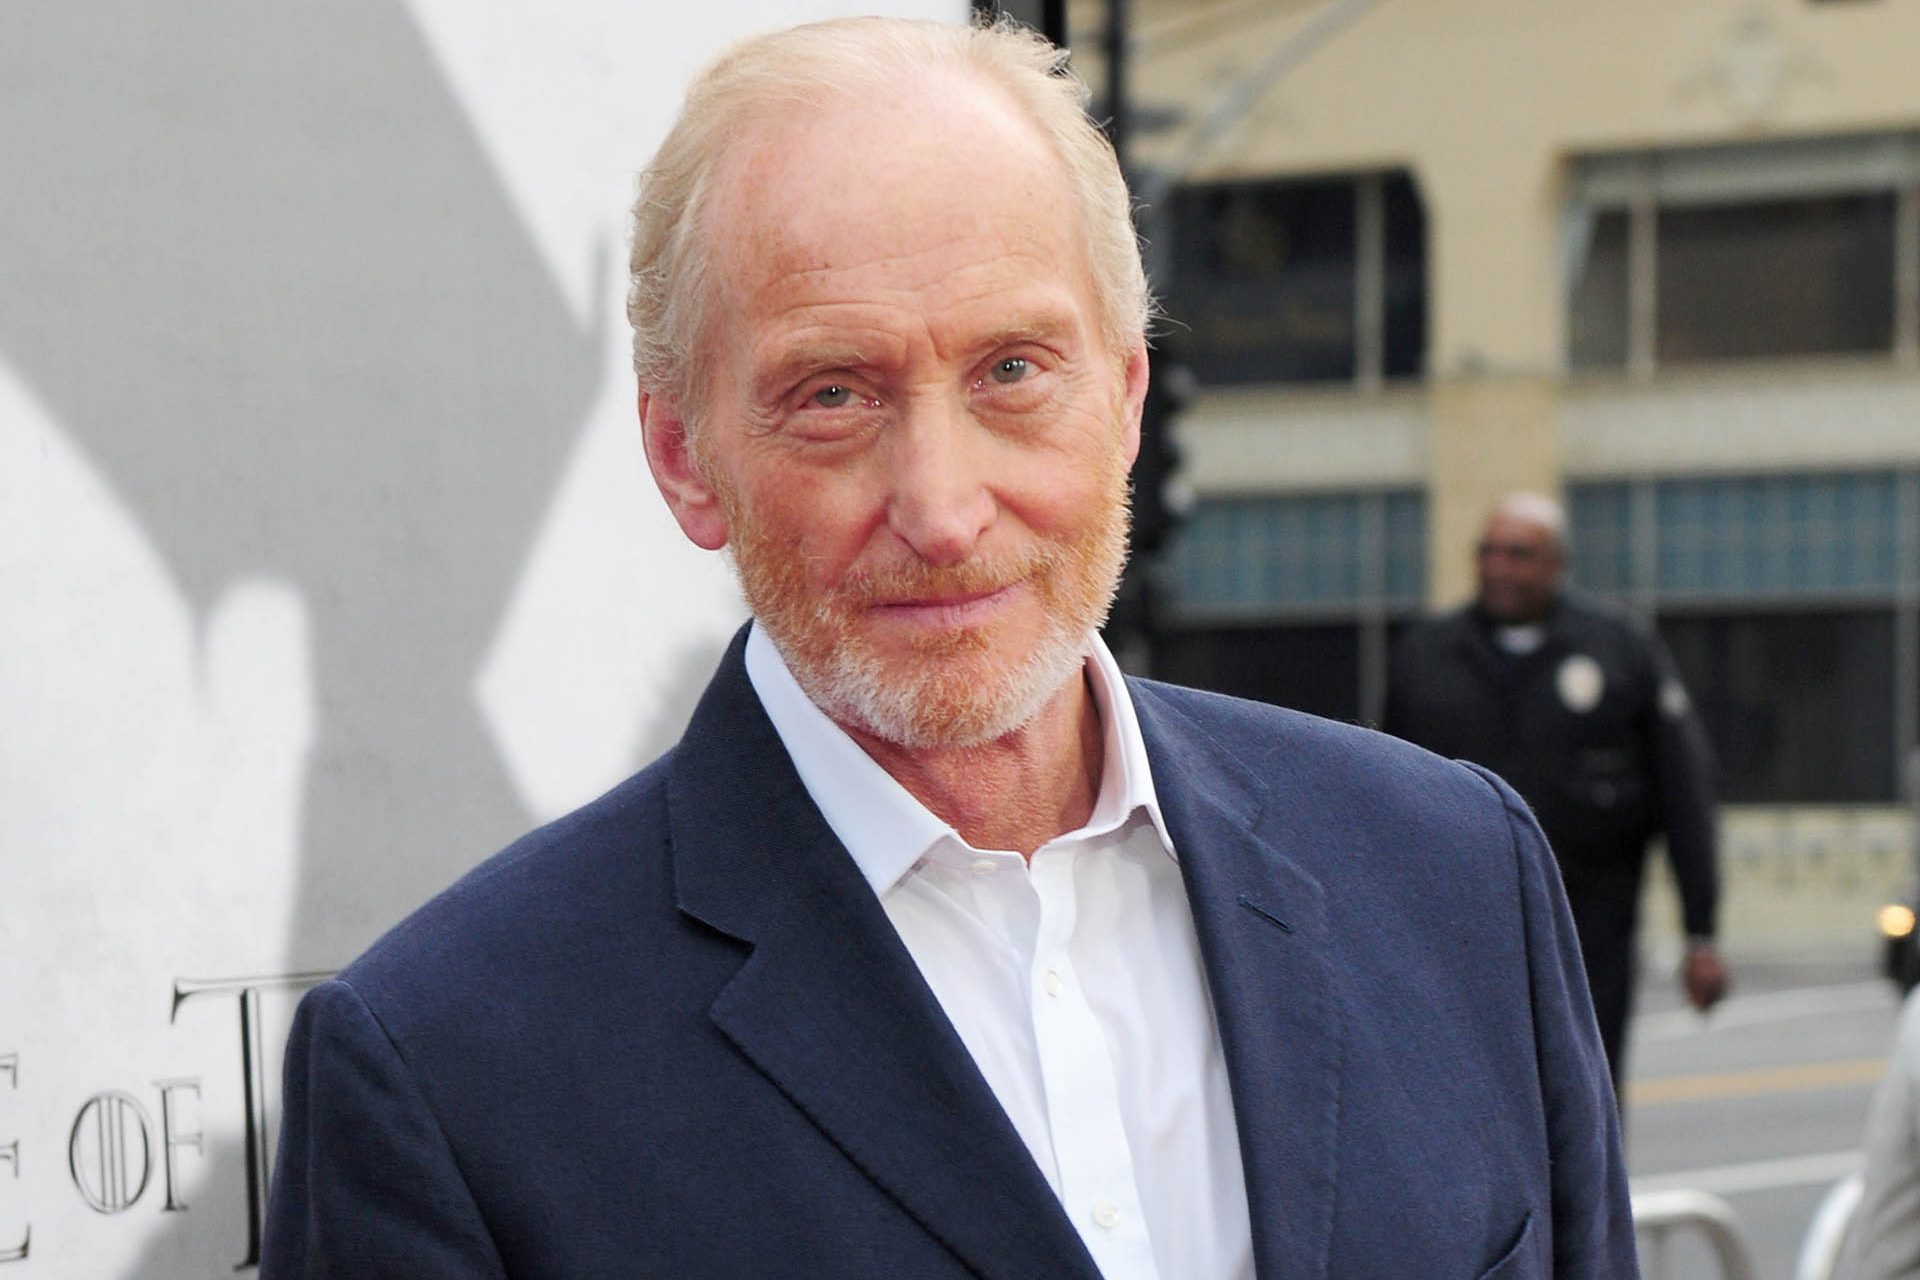 Tywin Lannister (Charles Dance) - 'Game of Thrones'